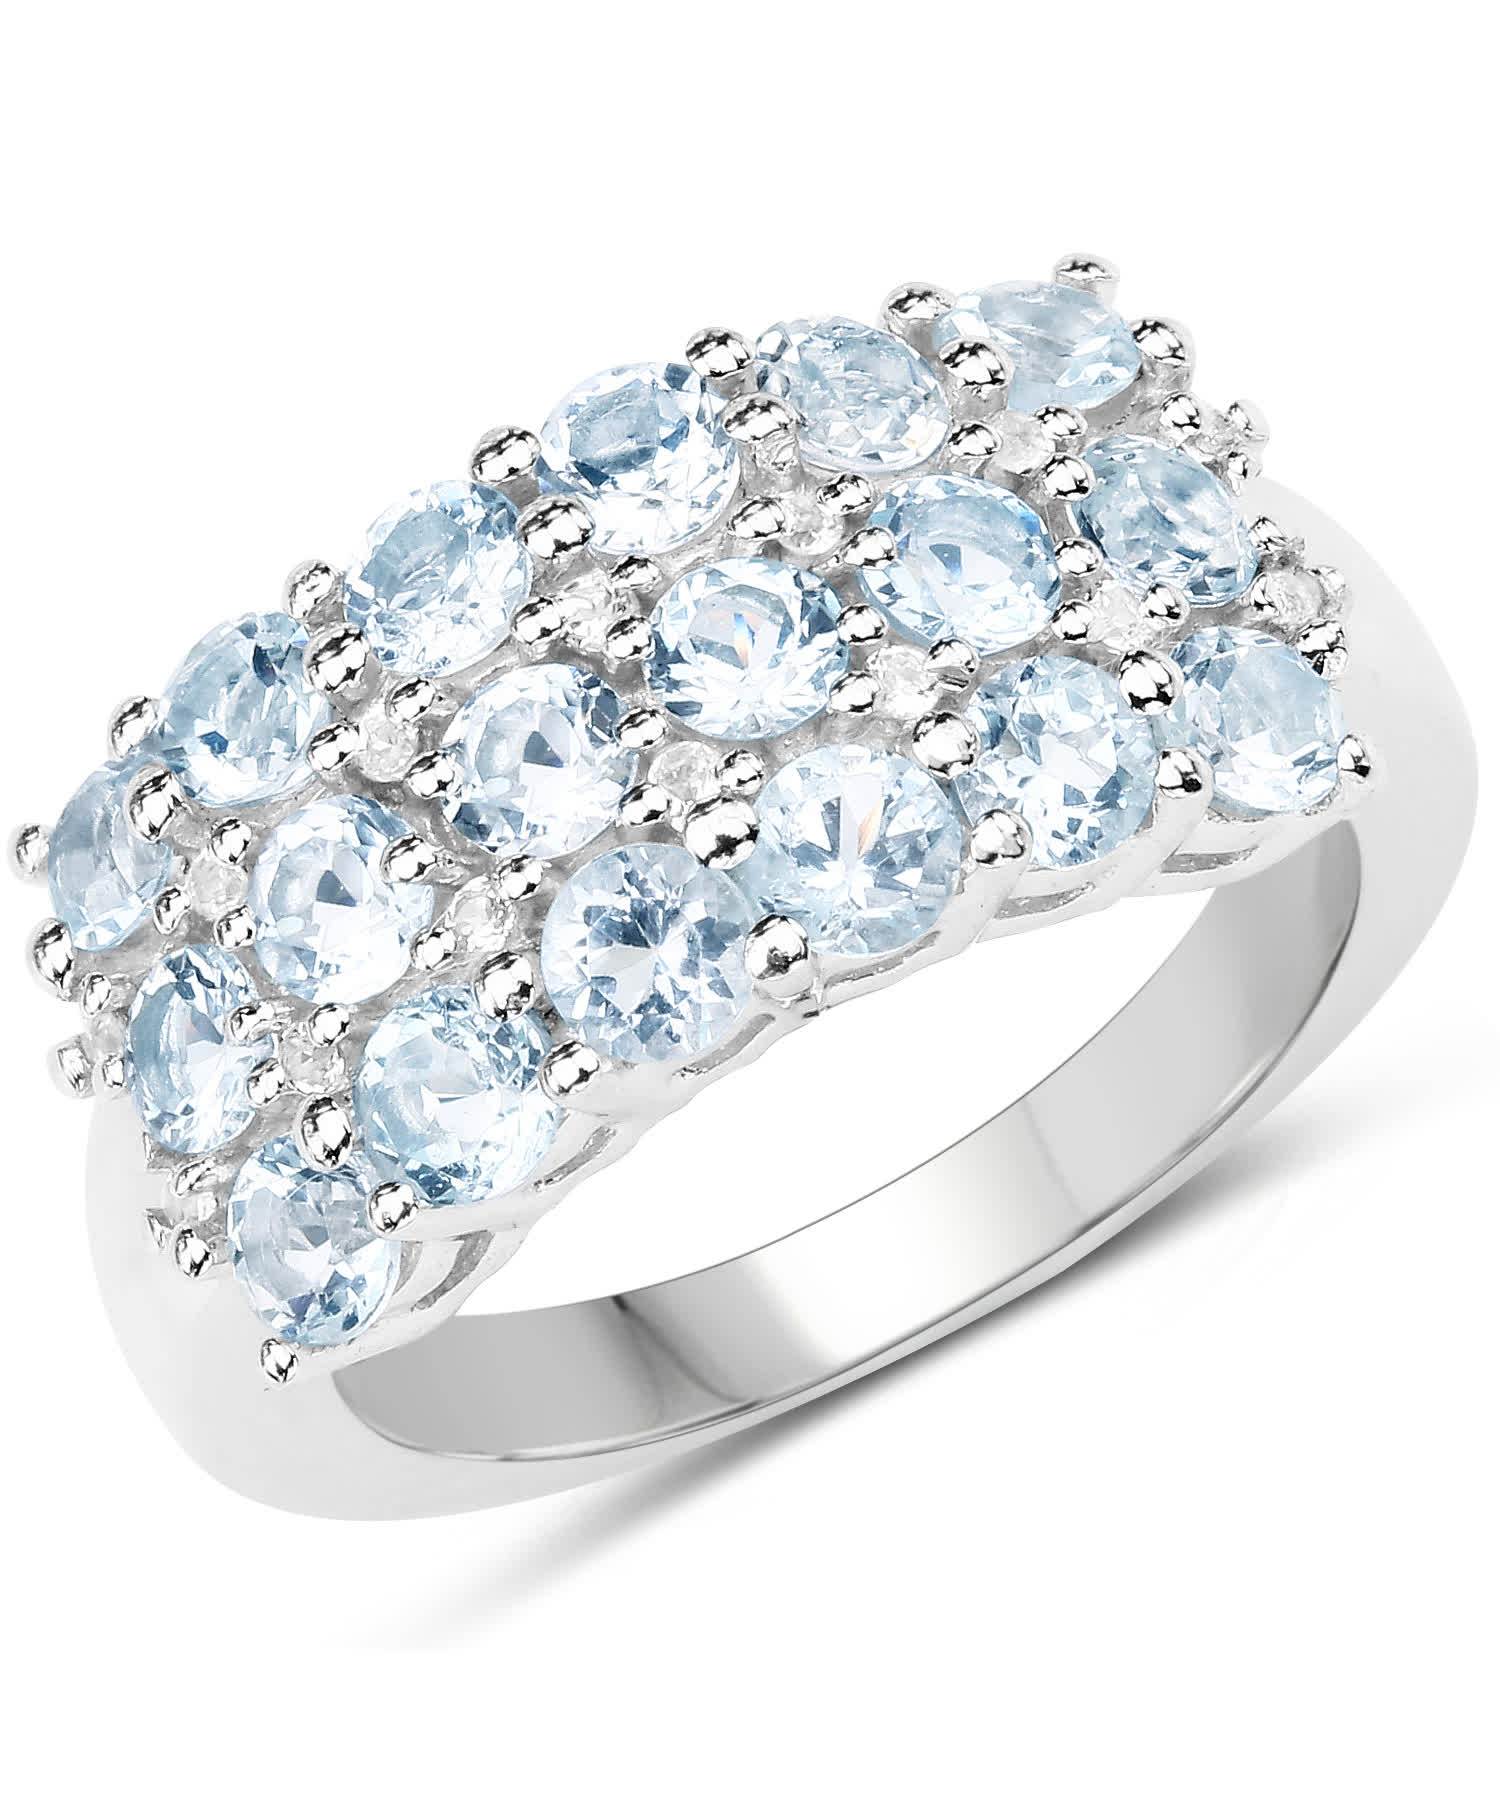 2.29ctw Natural Sky Blue Topaz Rhodium Plated 925 Sterling Silver Right Hand Ring View 1